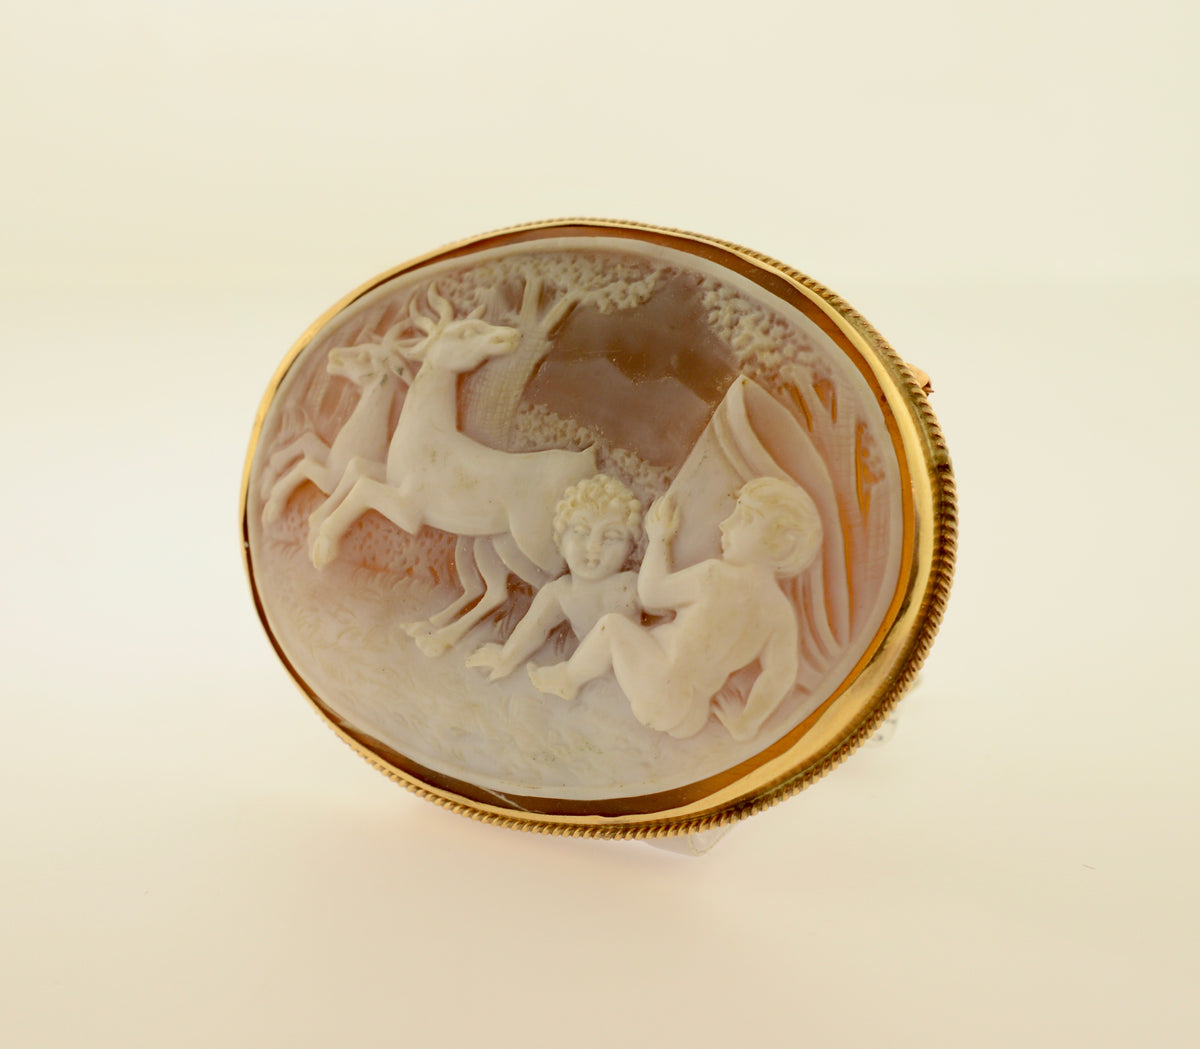 14K Yellow Gold Infant and Deer Shell Cameo Brooch